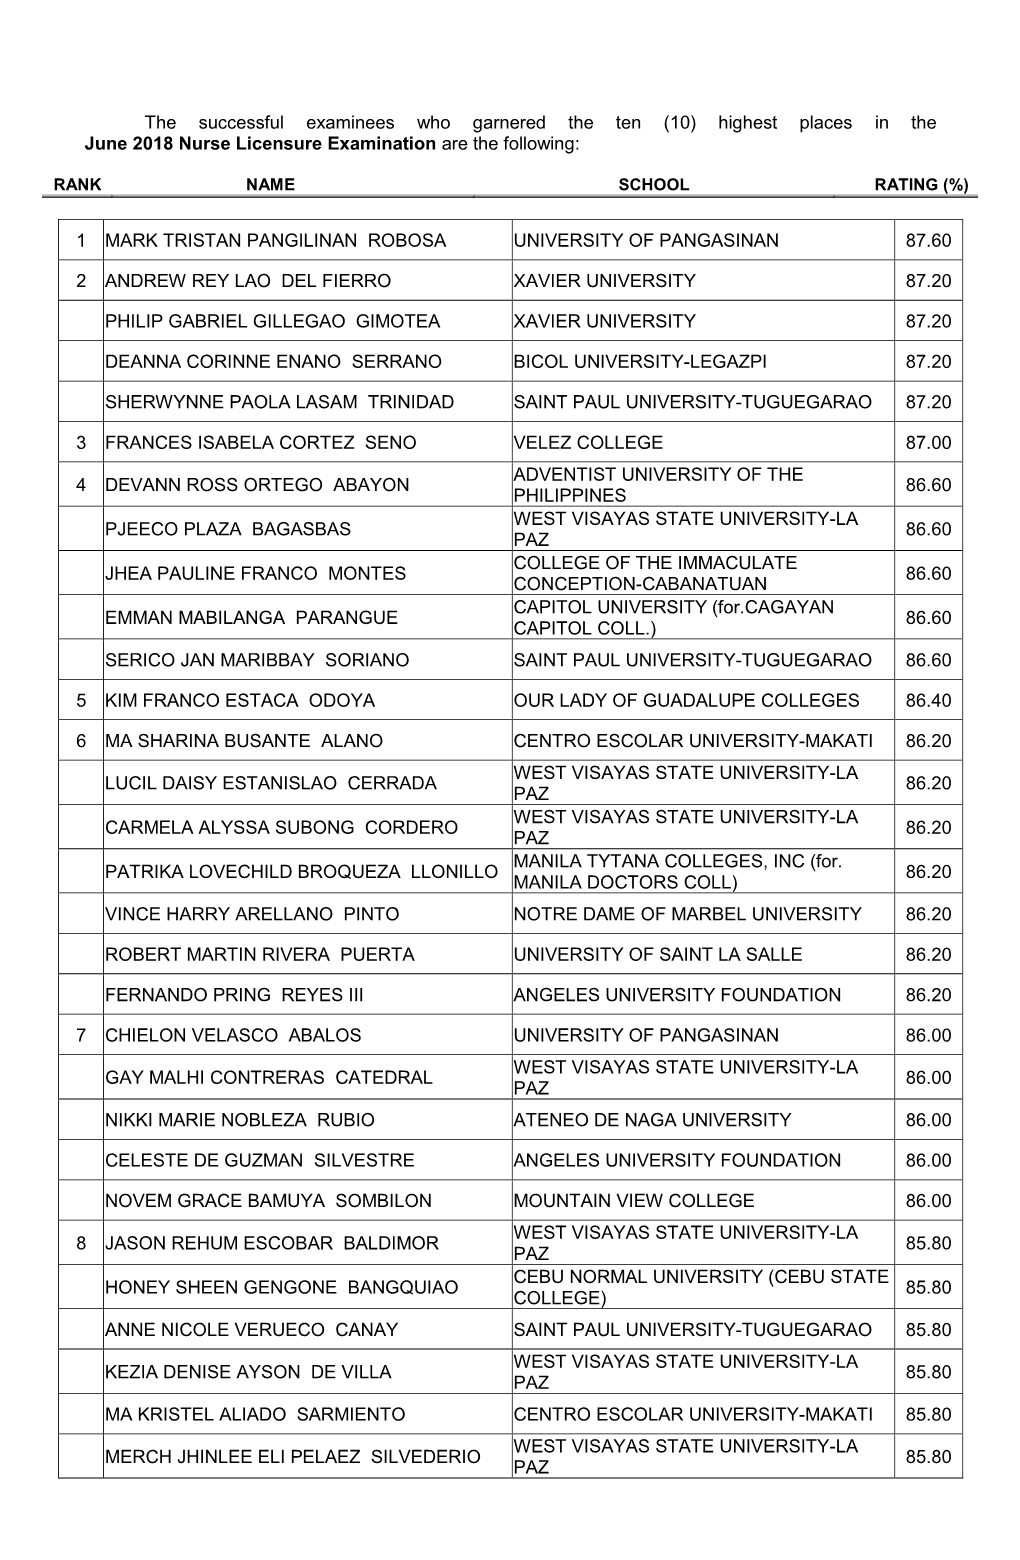 (10) Highest Places in the June 2018 Nurse Licensure Examination Are the Following